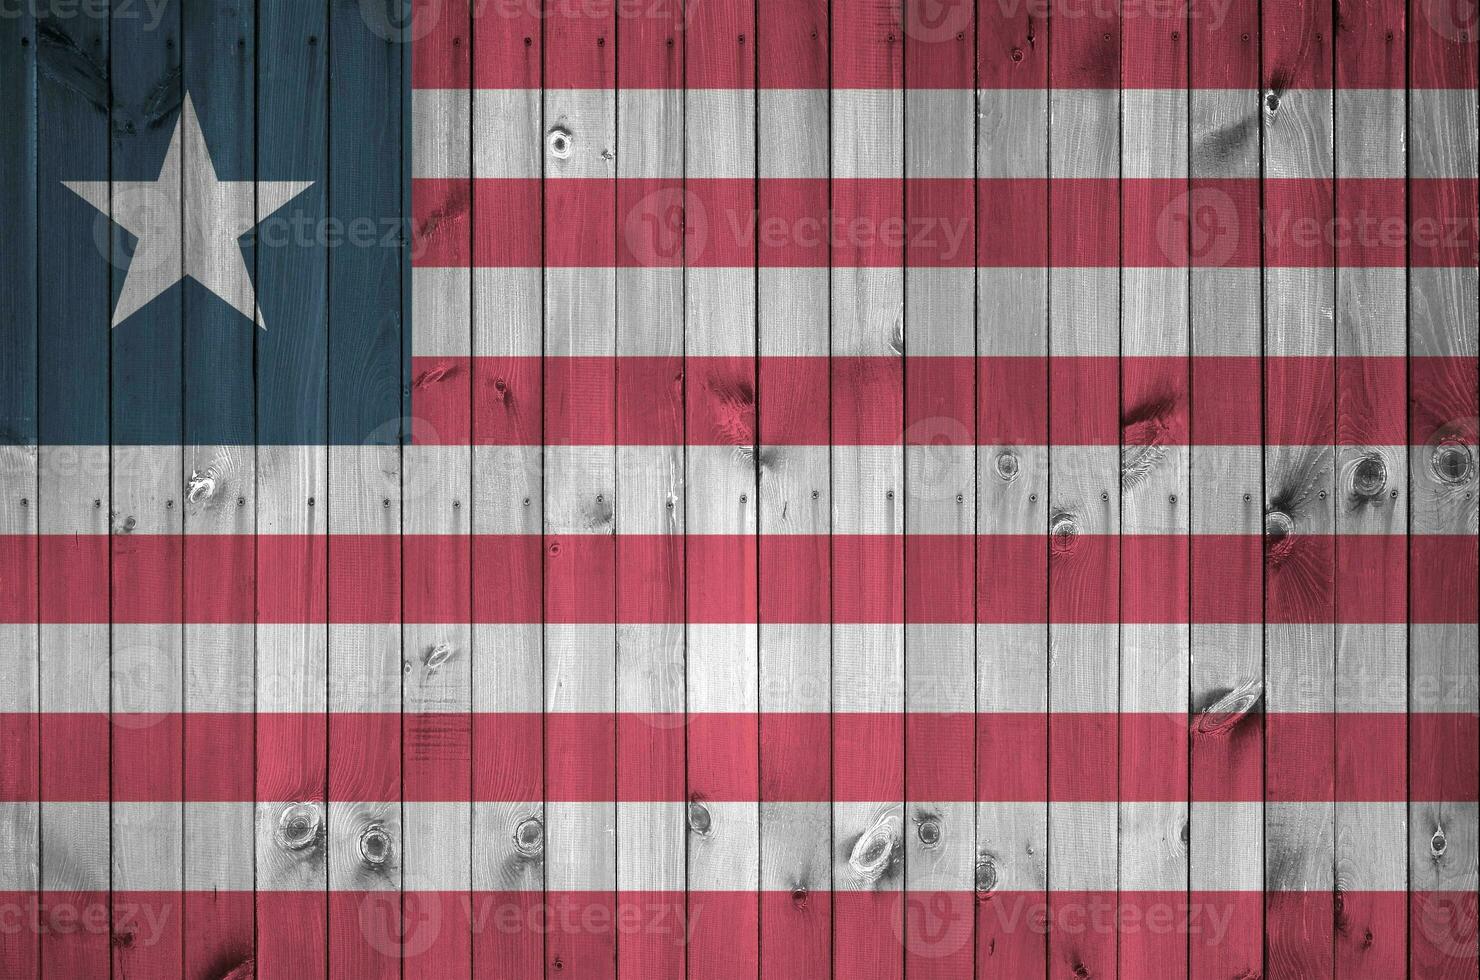 Liberia flag depicted in bright paint colors on old wooden wall. Textured banner on rough background photo